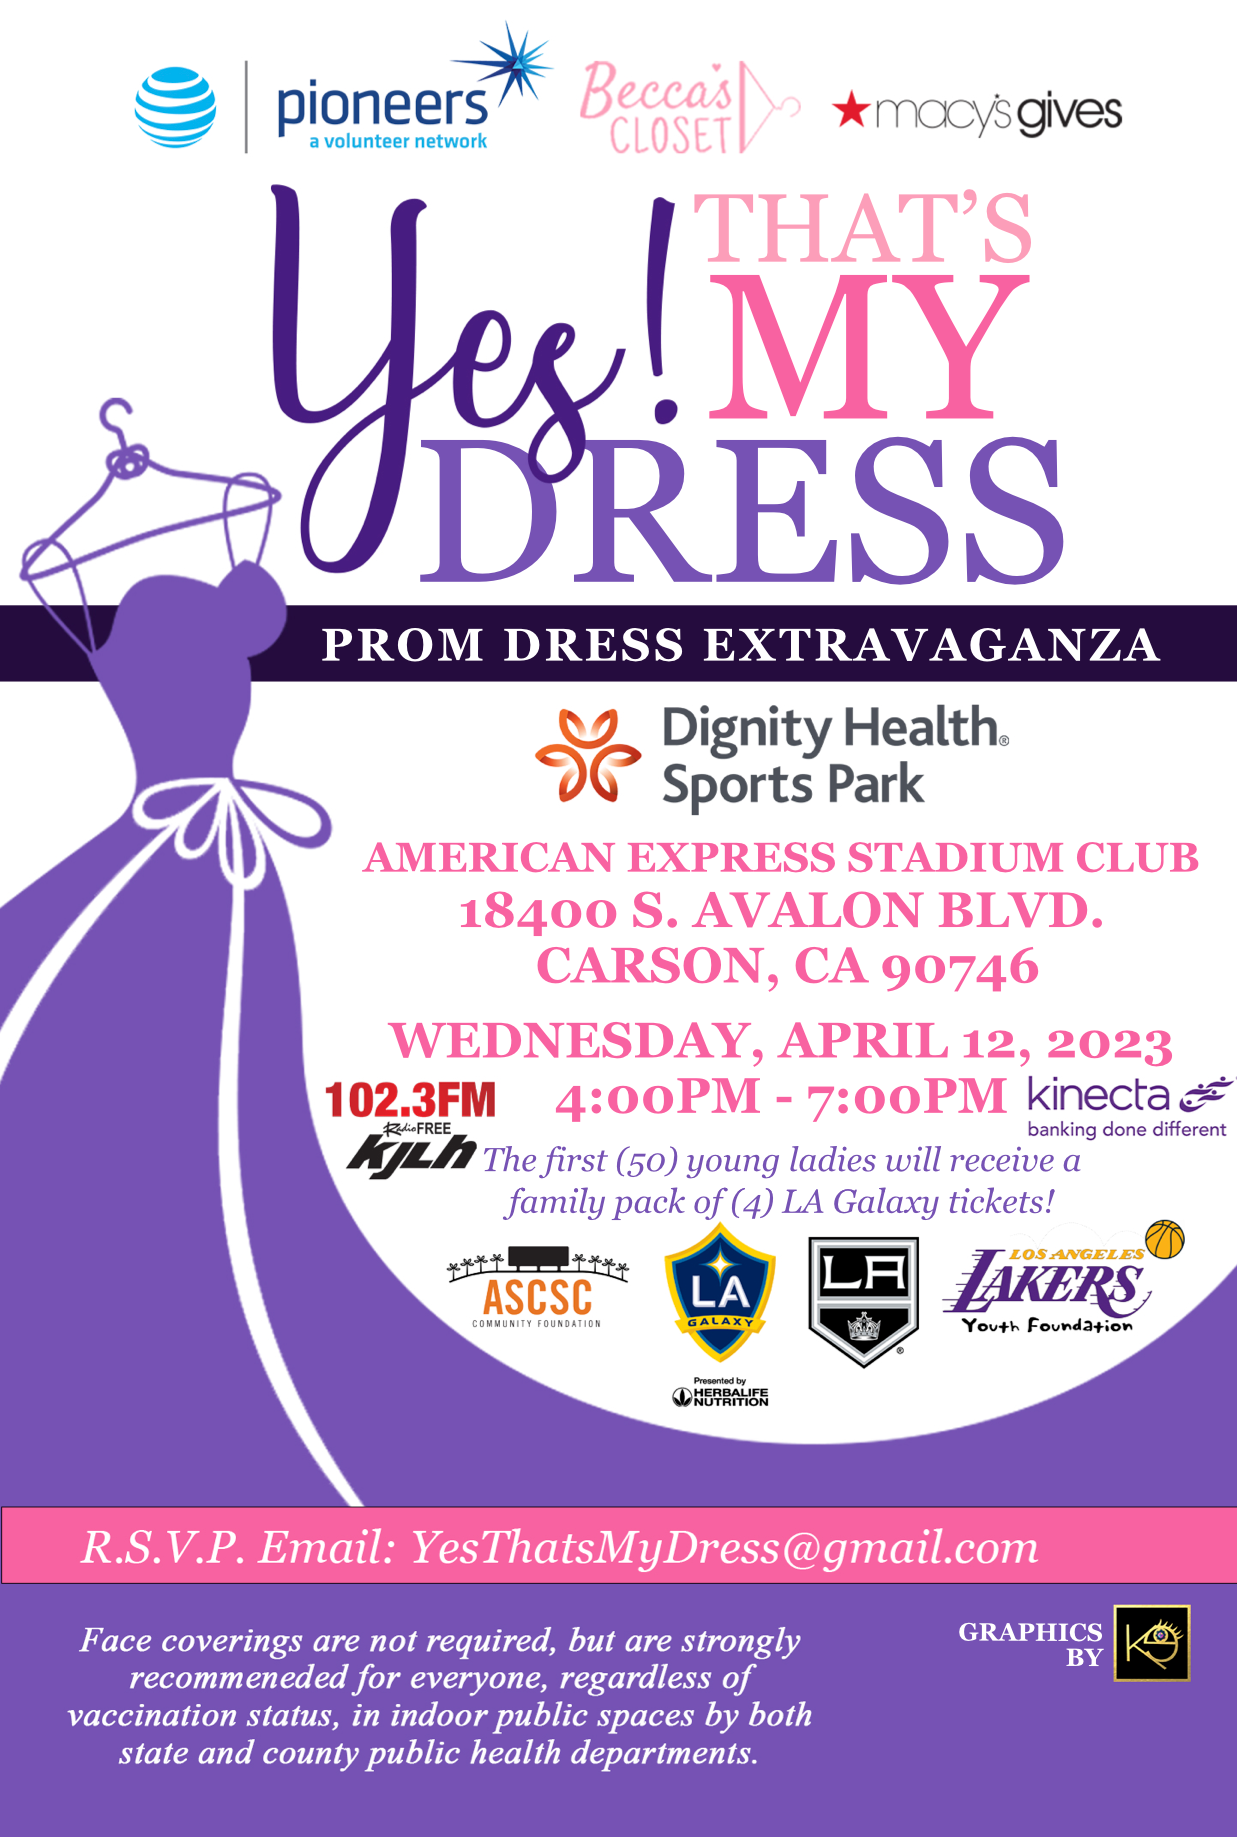 More Info for Dignity Health Sports Park’s ASCSC Community Foundation, LA Galaxy Foundation, Kings Care Foundation, Los Angeles Lakers Youth Foundation, and Kinecta Federal Credit Union to Partner With AT&T and Becca’s Closet to Host Pop-Up Prom Dress Giveaway “Yes! That’s My Dress” at Dignity Health Sports Park